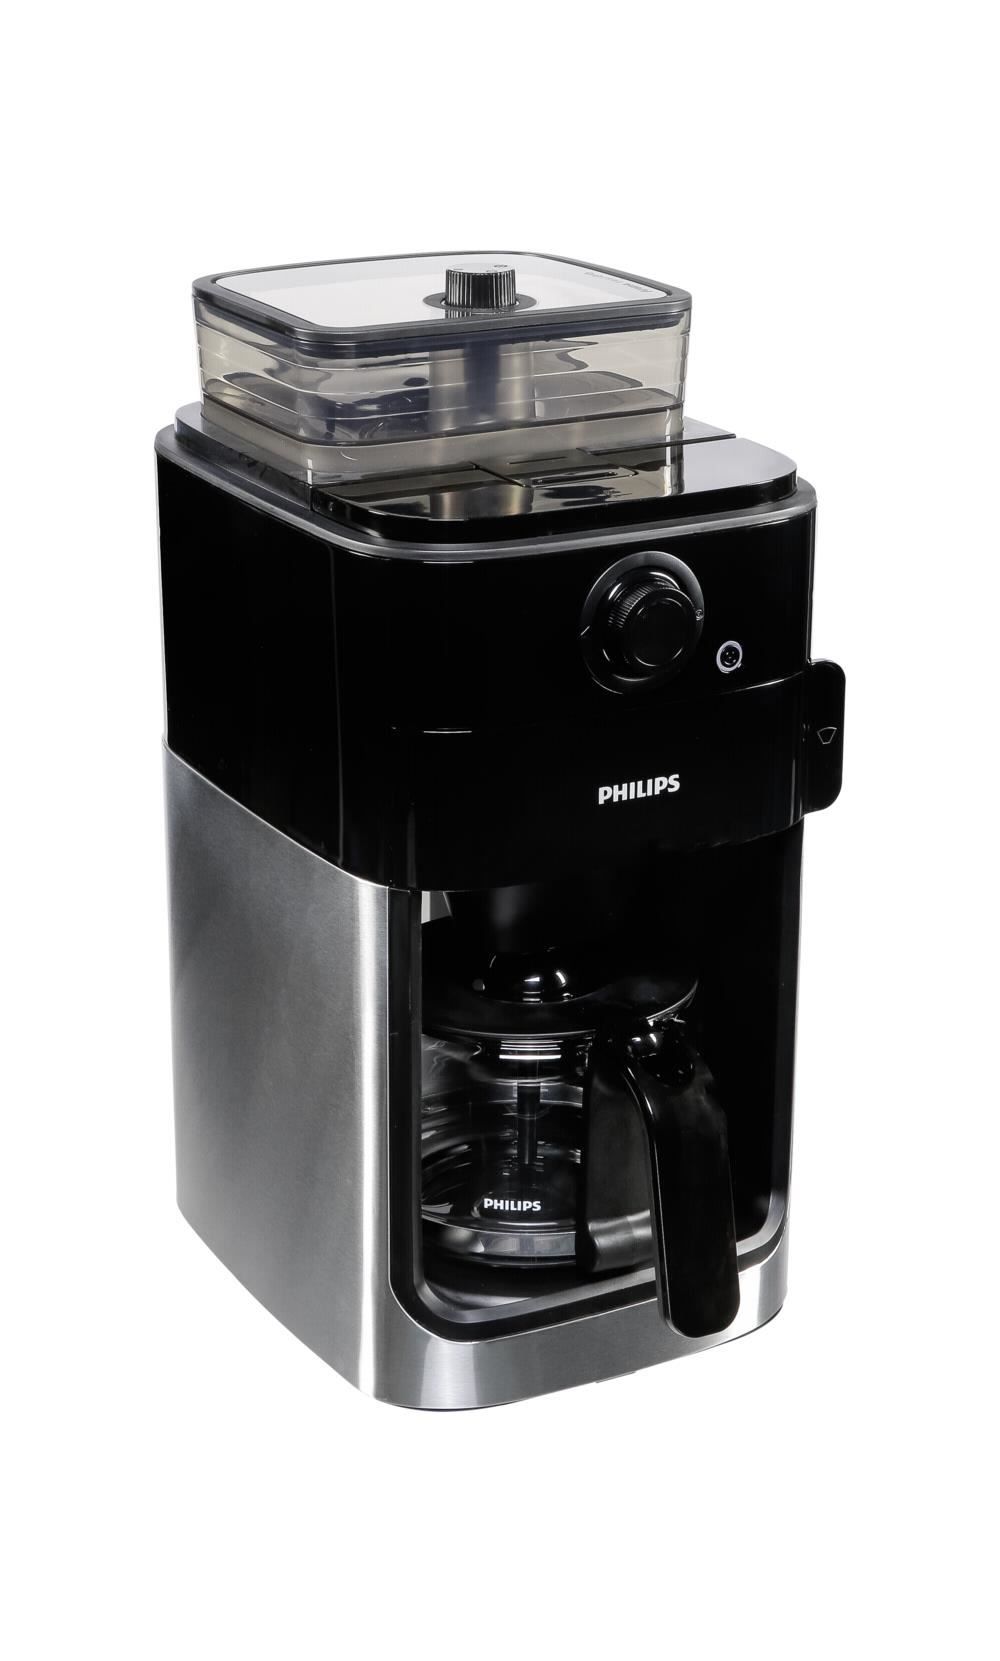 Philips grind brew. Philips hd7767. Кофеварка Филипс hd7769. Philips hd7769/00. Кофеварка Philips hd7767 Grind & Brew.